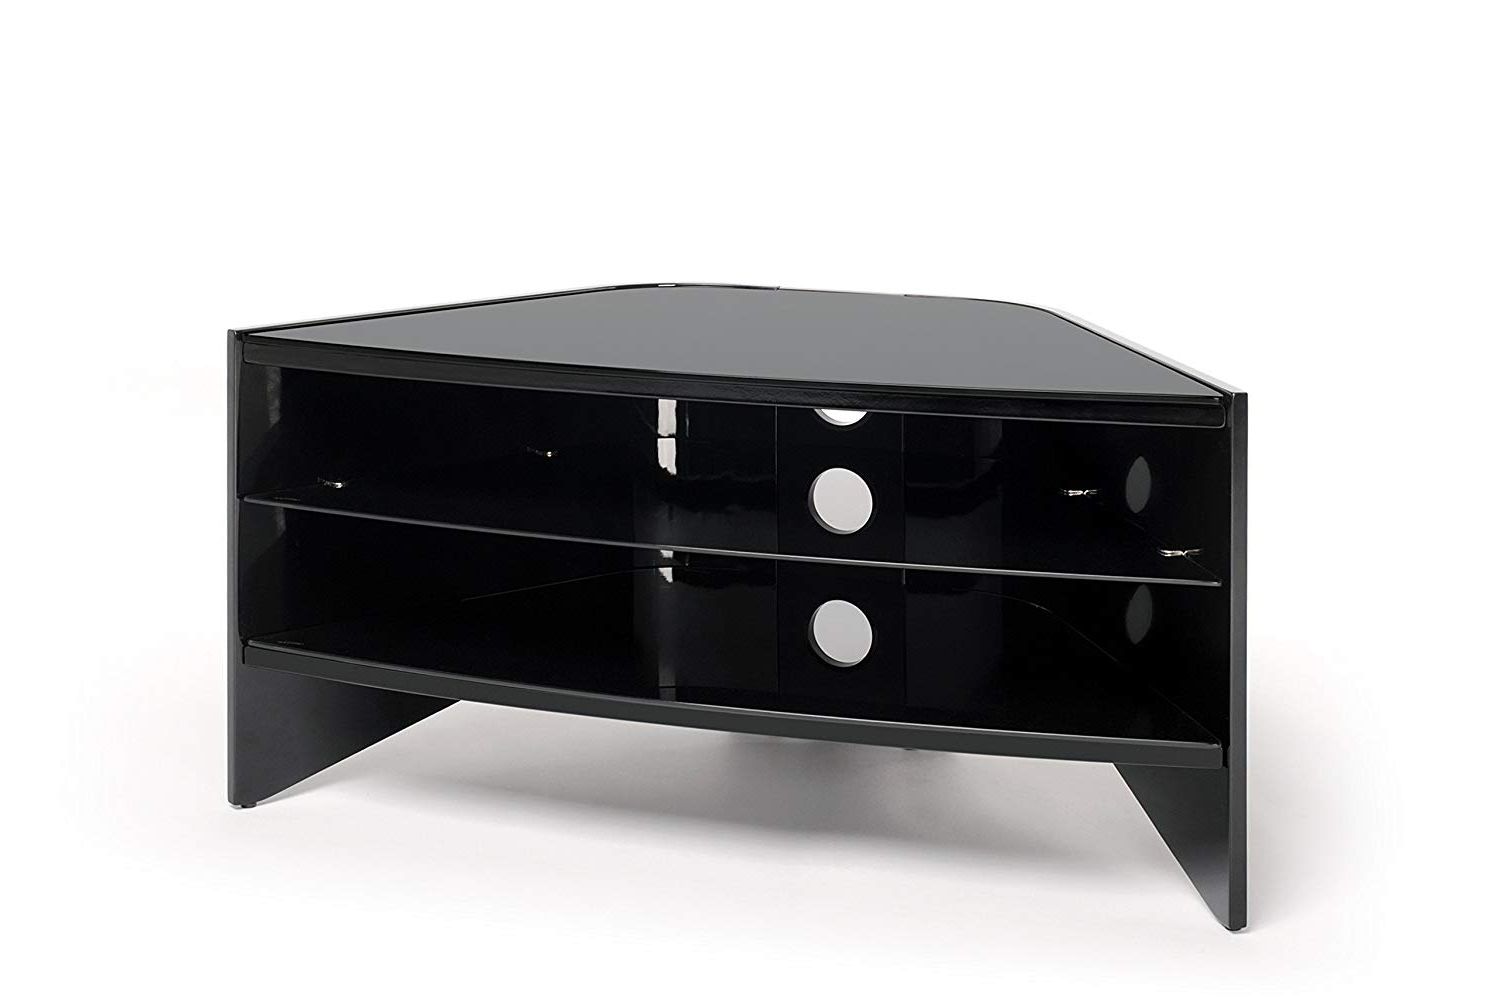 Techlink Riva Rv100b Curved High Gloss Black Side Panels And Glass Pertaining To Most Up To Date Ovid White Tv Stand (View 6 of 20)